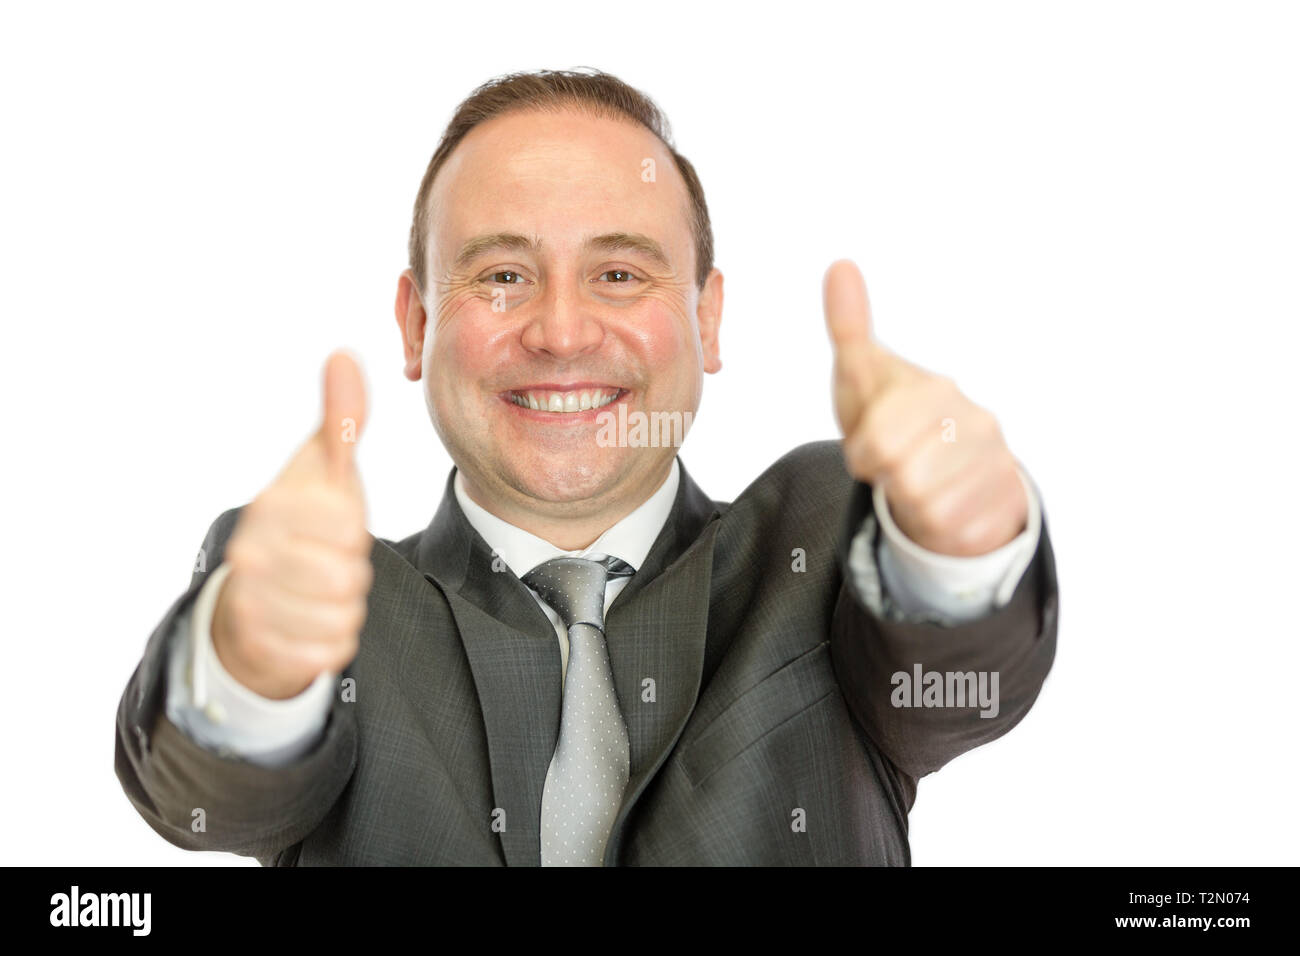 A happy, enthusiastic, mature businessman giving thumbs up signals with both hands on a white background with copy space. Stock Photo